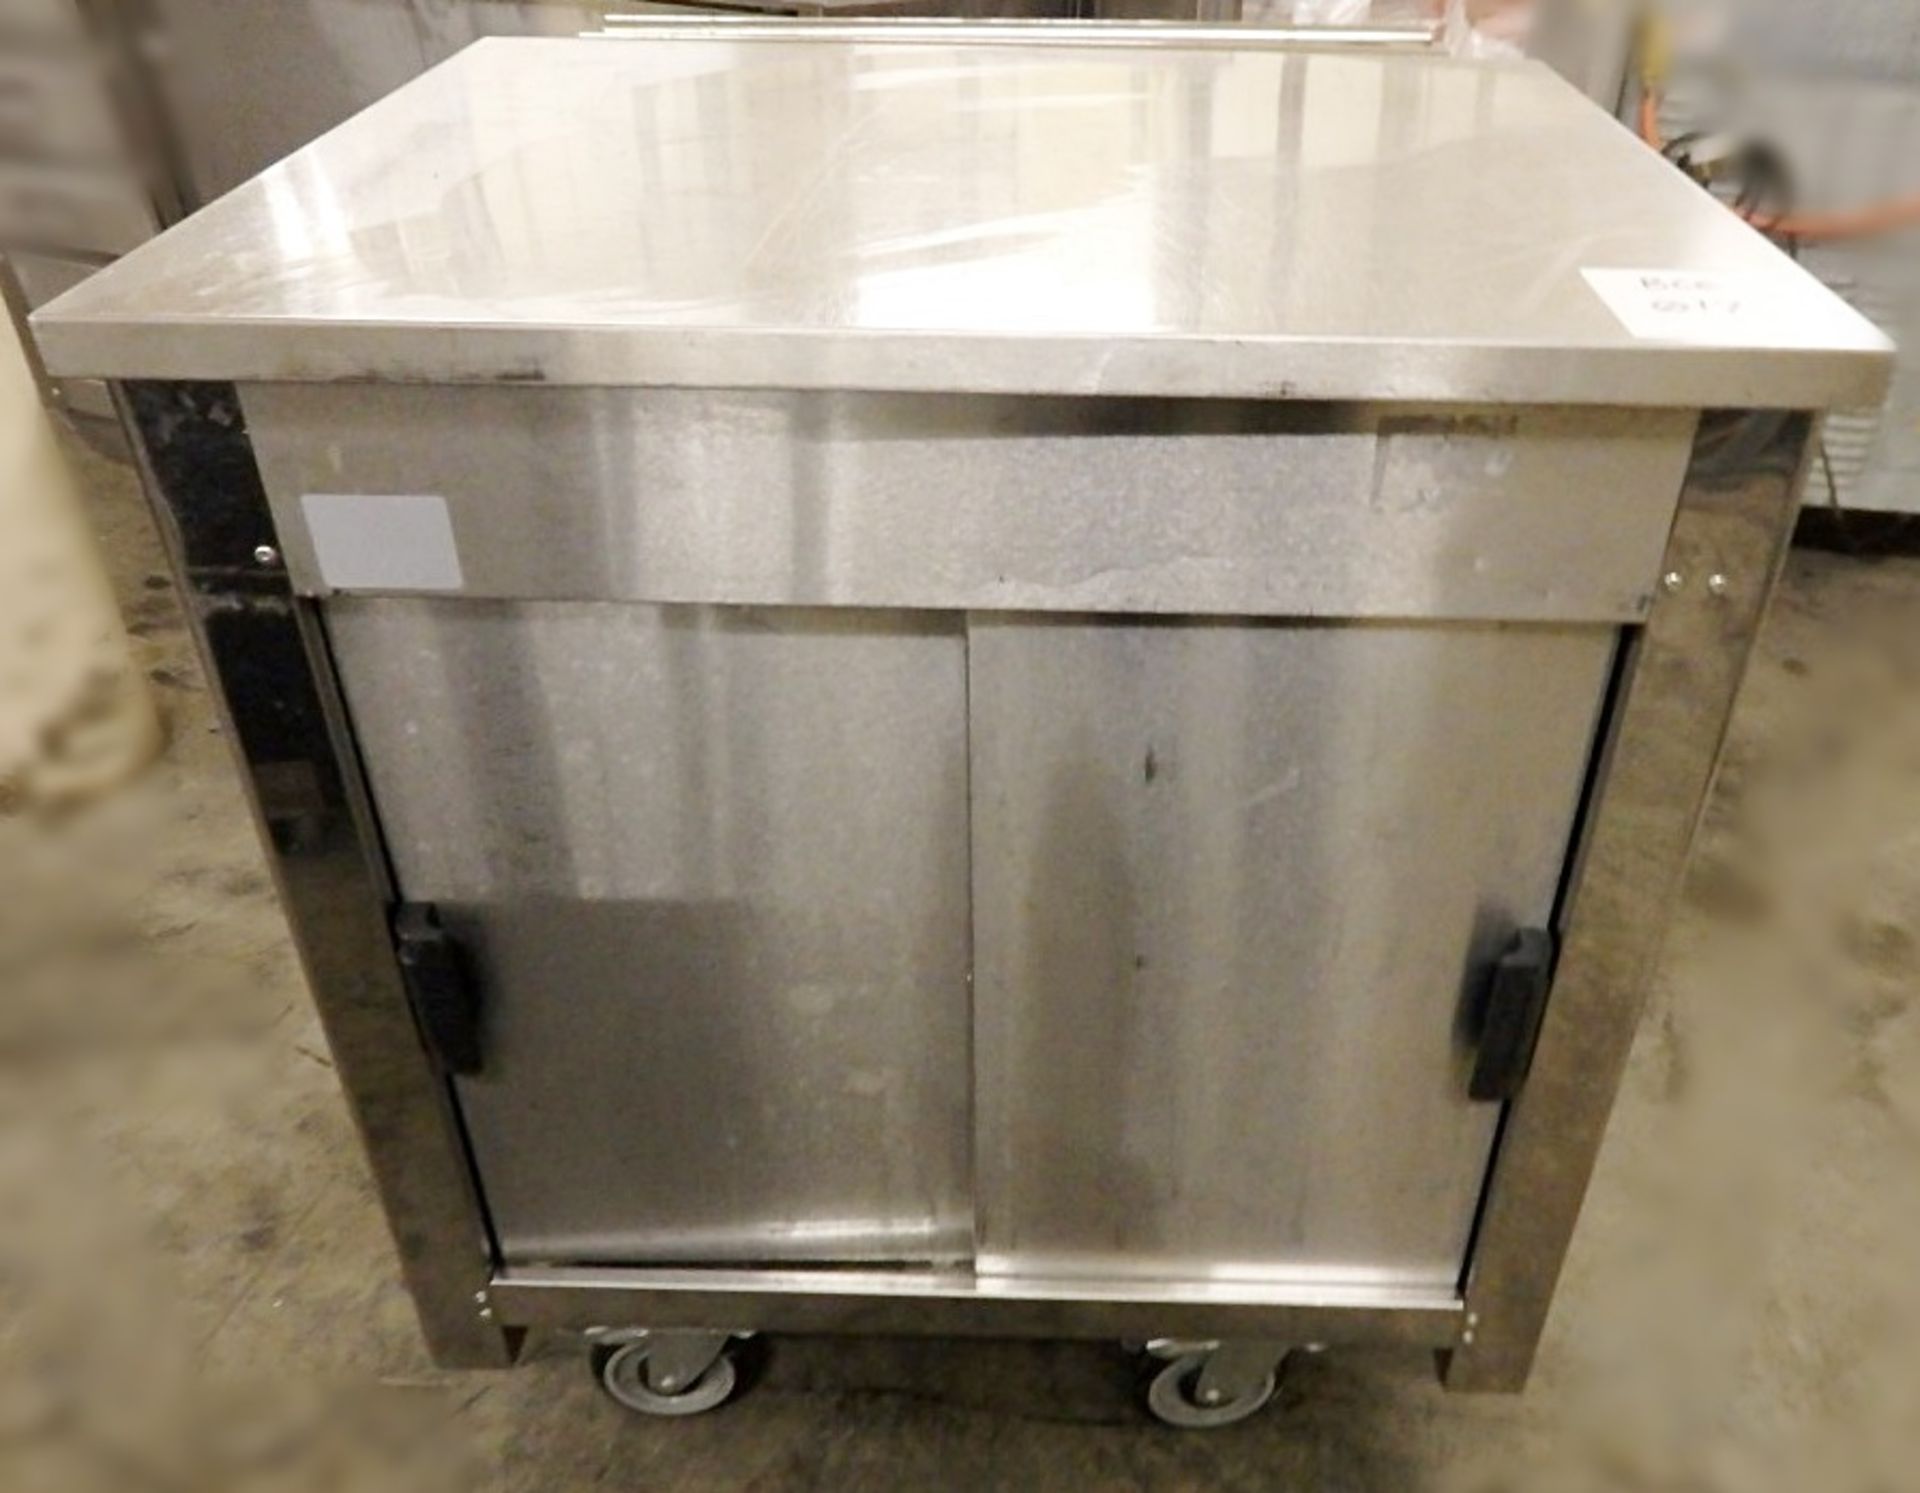 1 x Serving Counter With Storage - On Castors For Maneuverability - Ideal For Pub Carvery, Canteens, - Image 6 of 8